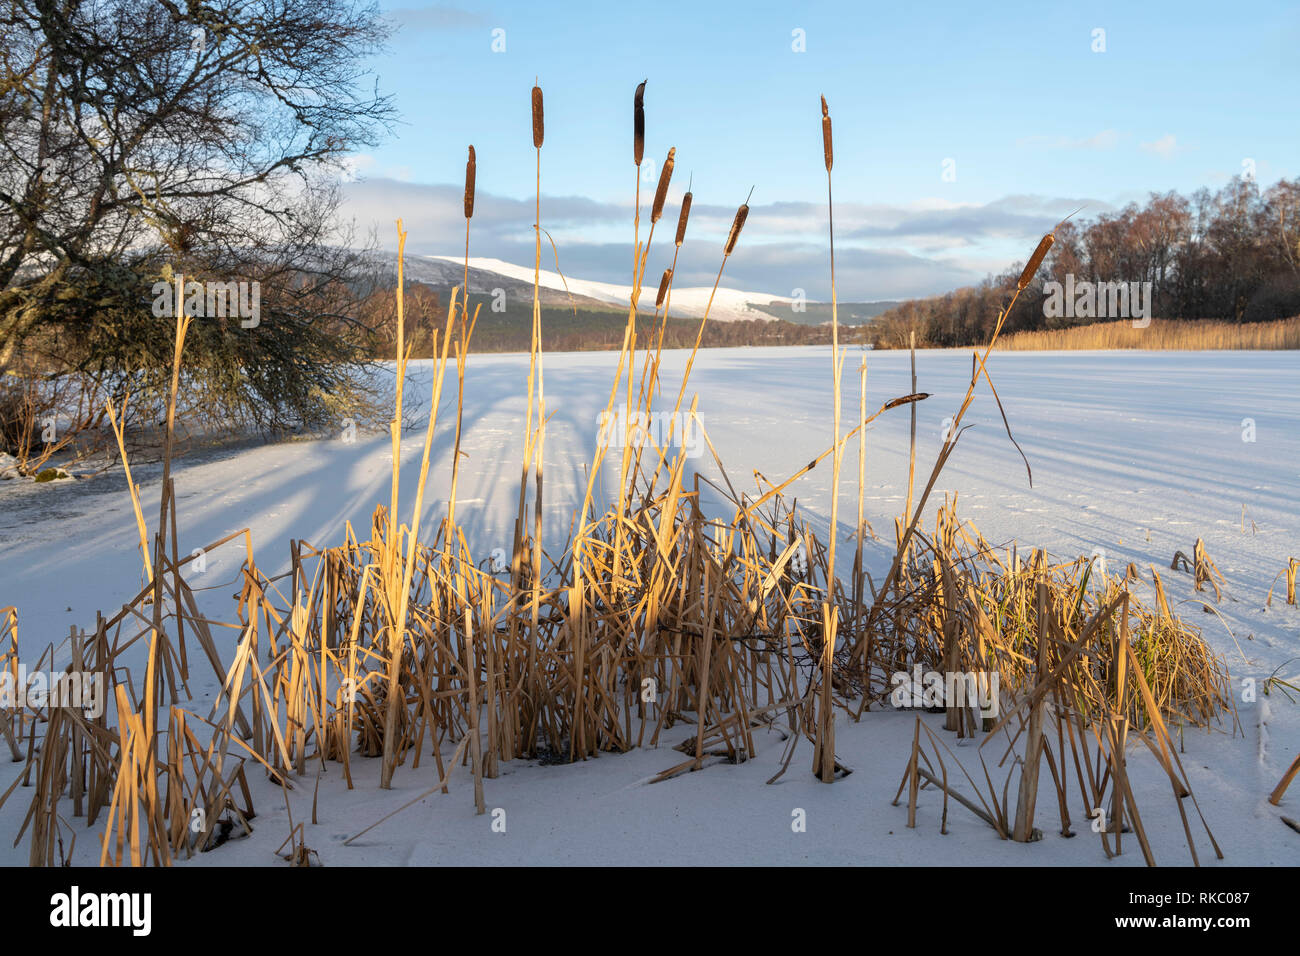 Bulrushes on the Edge of Frozen Loch Kinnord at Sunrise Stock Photo